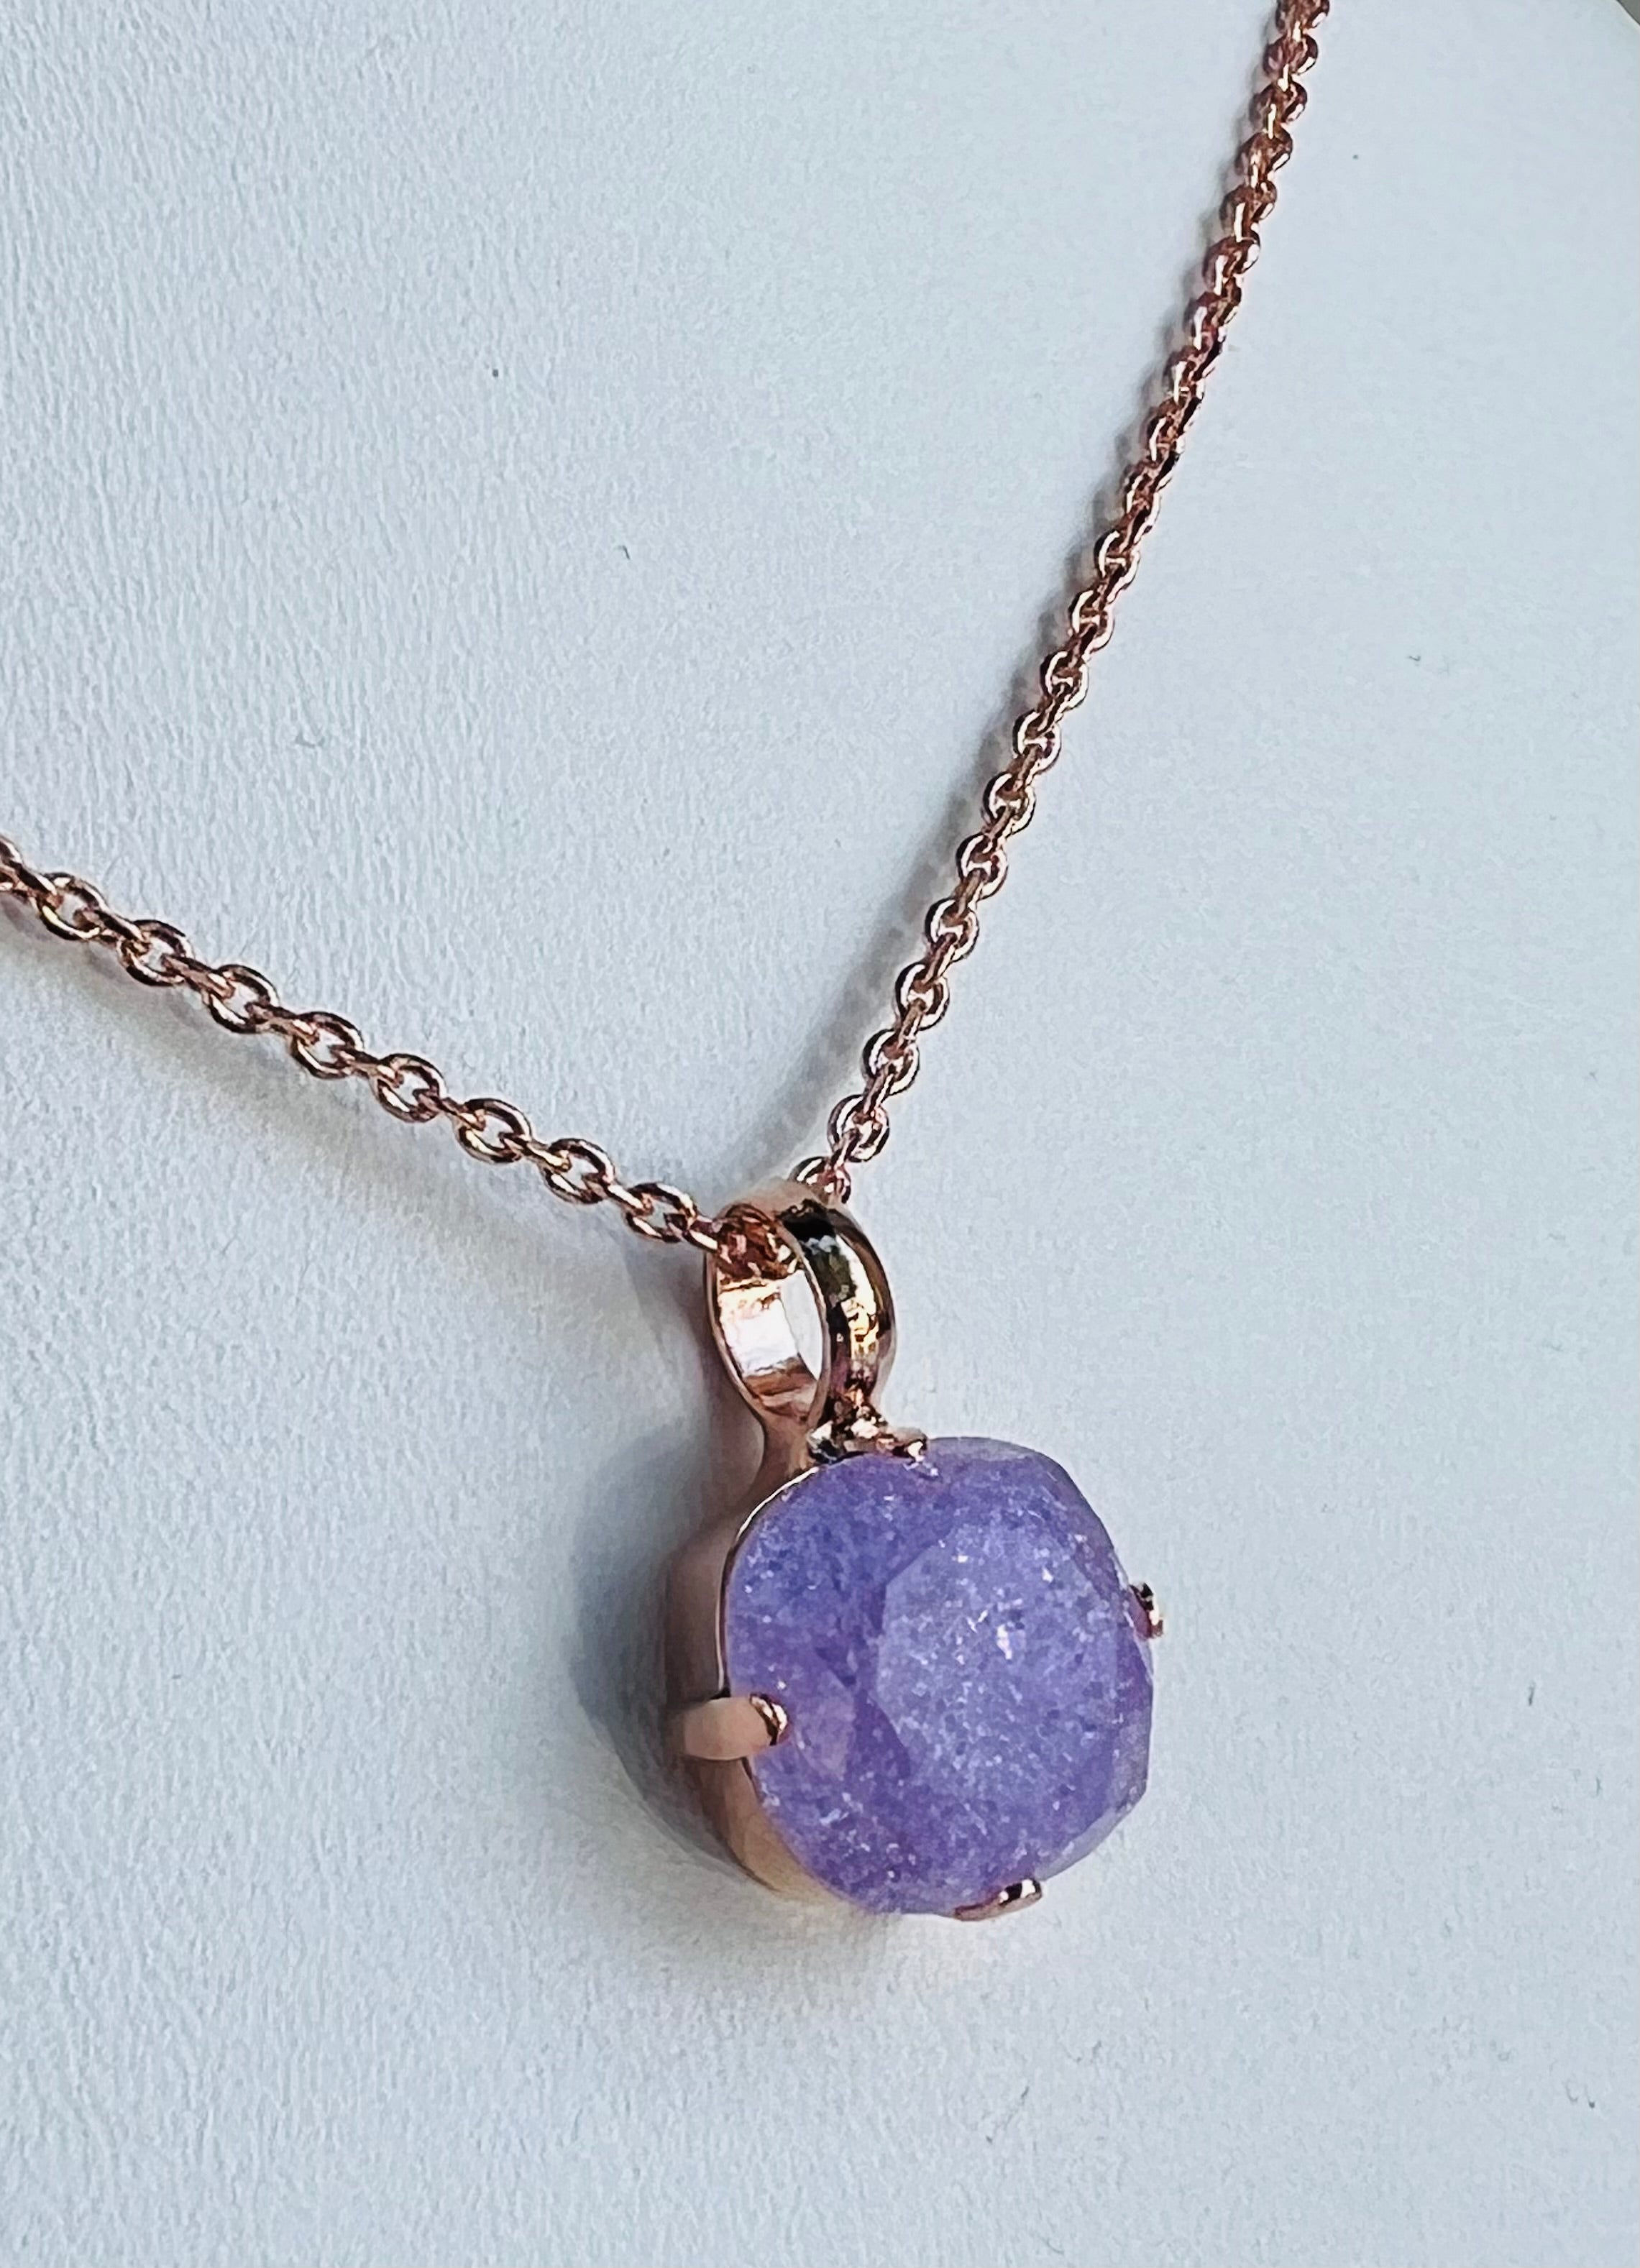 Mariana Rose Gold Cushion Cut Crystal Pendant Necklace in "Violet Ice"